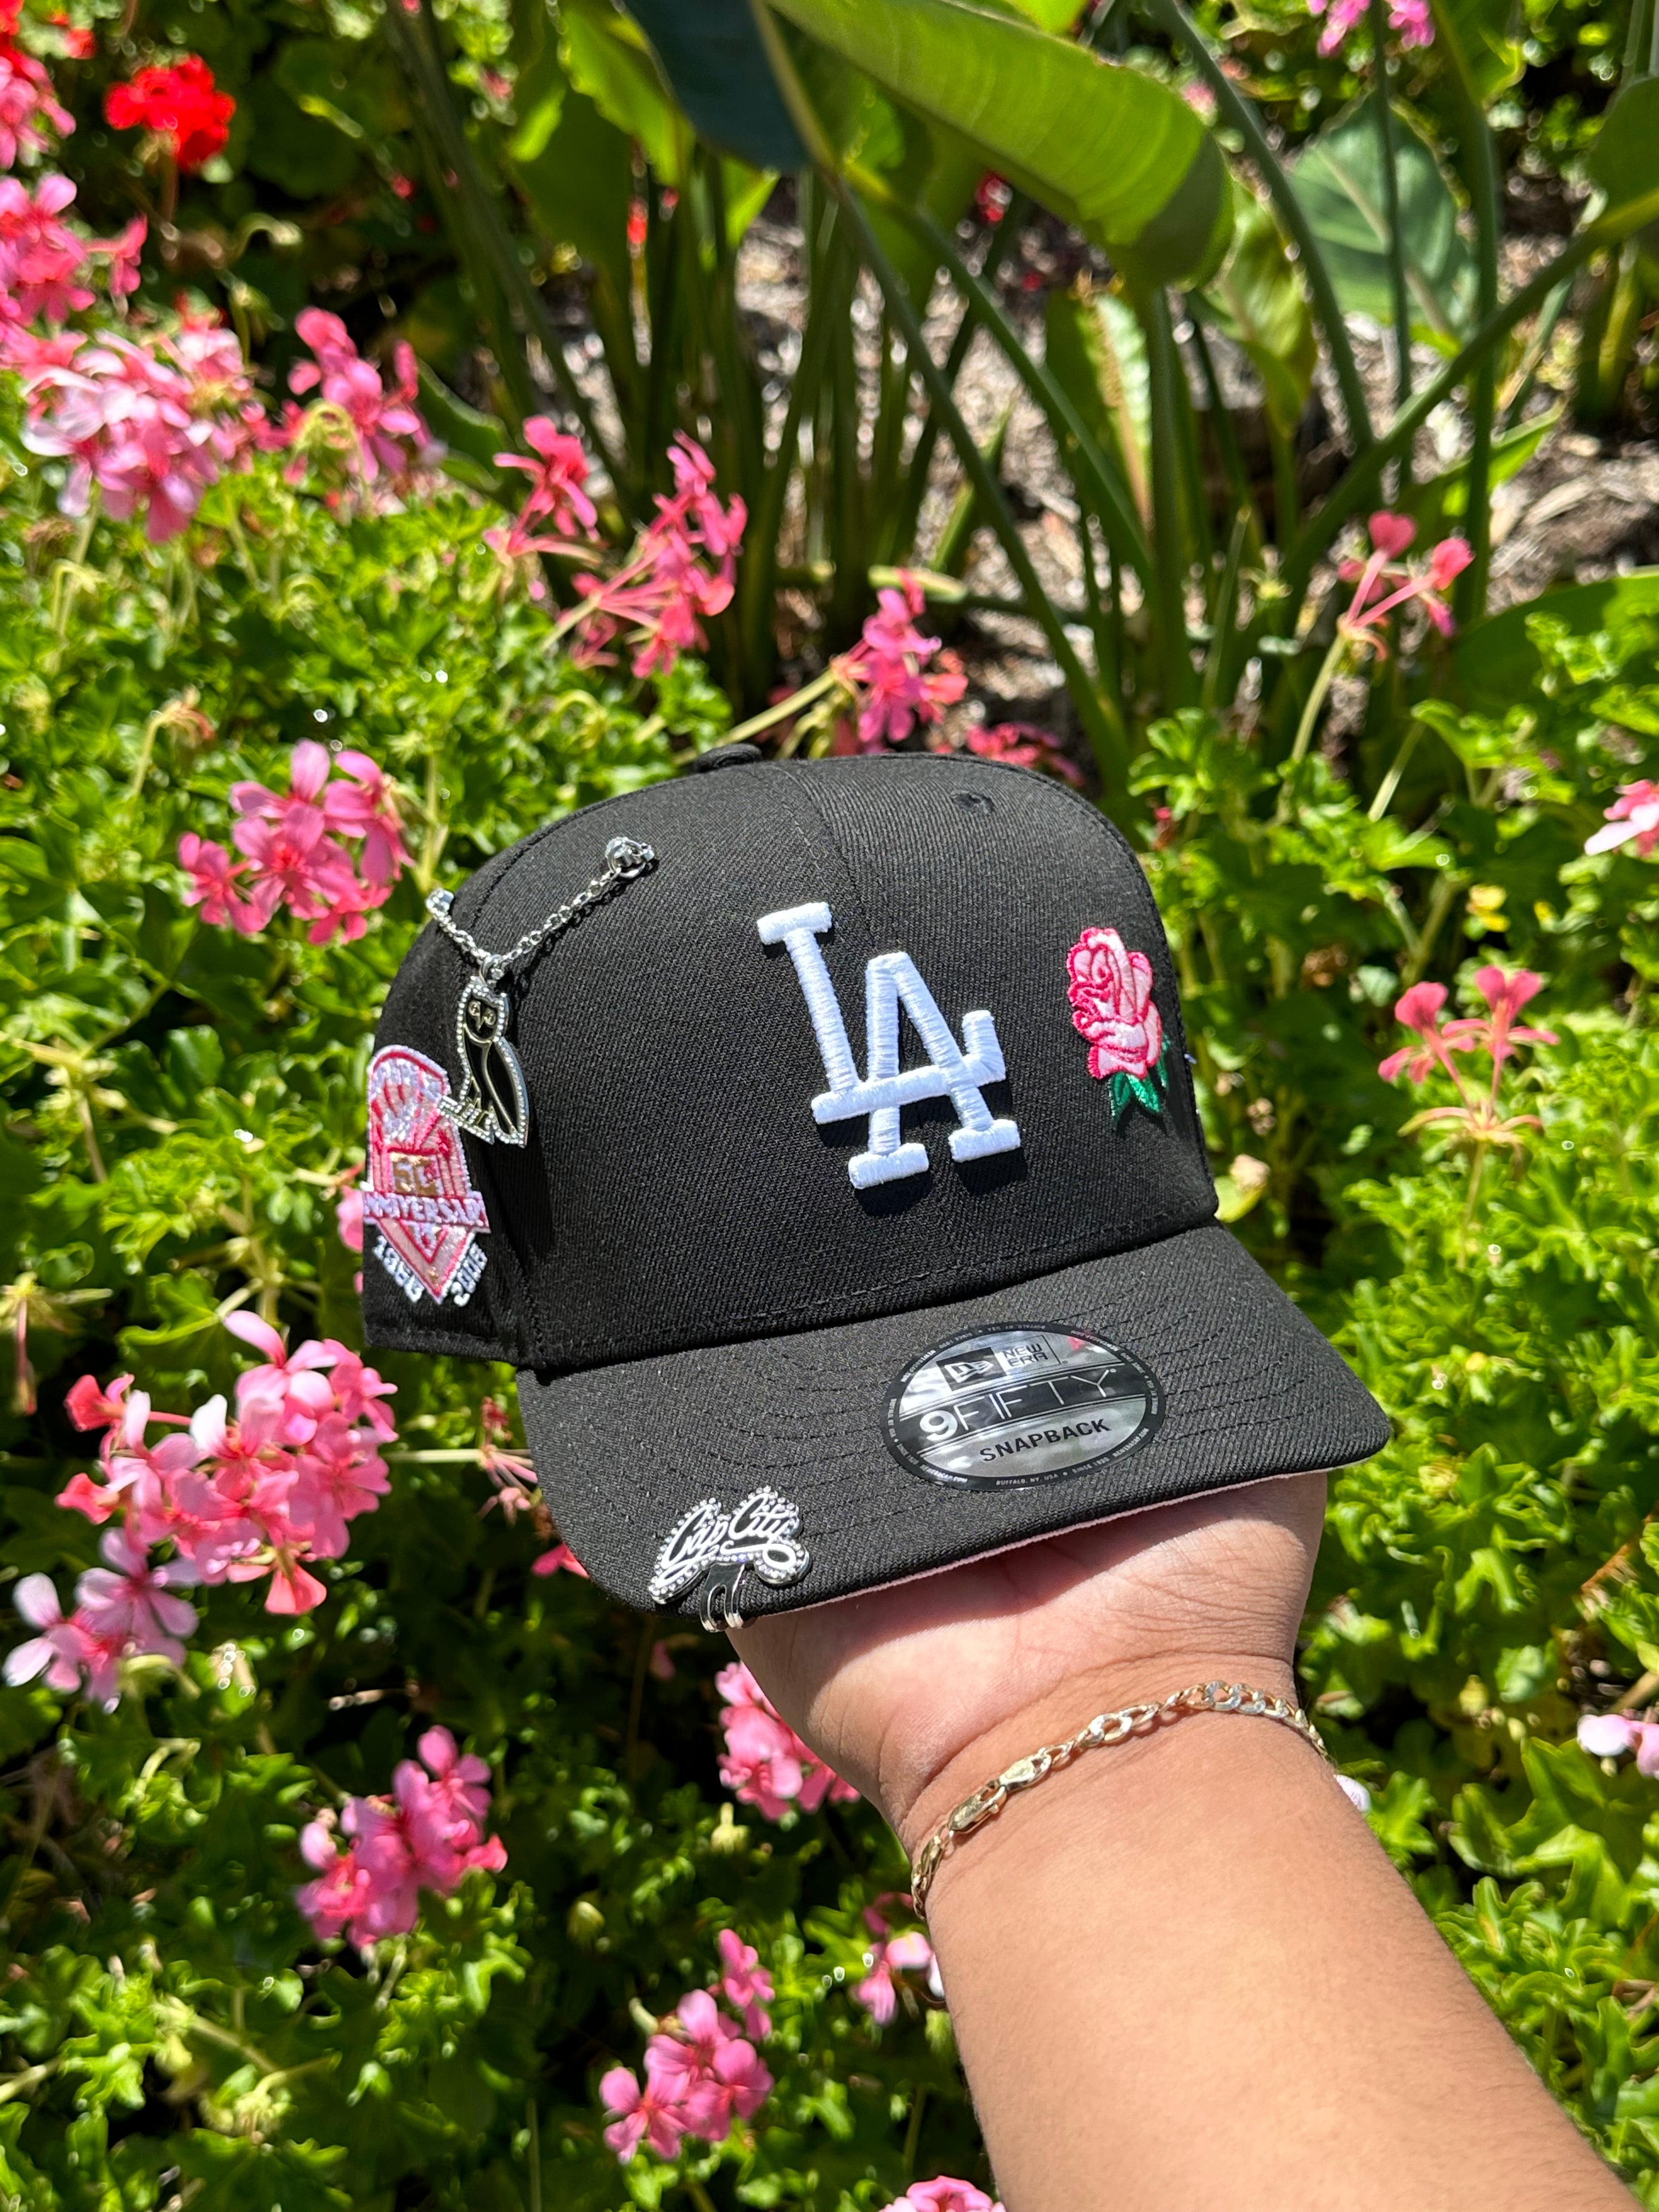 NEW ERA EXCLUSIVE 9FIFTY BLACK LOS ANGELES DODGERS SNAPBACK W/ PINK ROSE + 50TH ANNIVERSARY PATCH